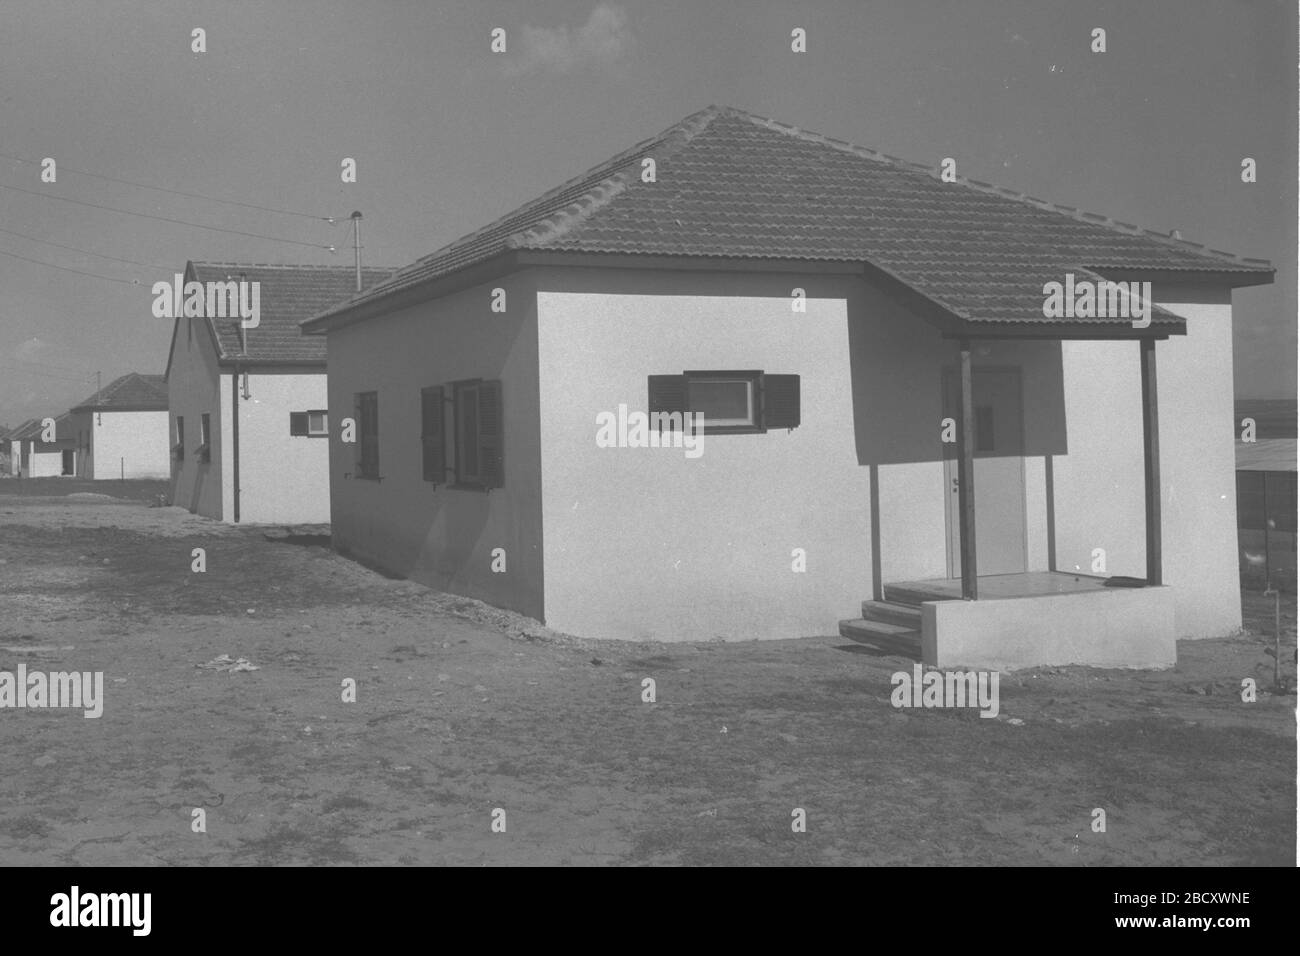 'English: A LINE OF HOUSES AT KFAR SHMARYAHU. ◊ë◊™◊ô◊ù ◊ë◊õ◊§◊® ◊©◊û◊®◊ô◊î◊ï.; 30 December 1937; This is available from National Photo Collection of Israel, Photography dept. Goverment Press Office (link), under the digital ID D28-068.This tag does not indicate the copyright status of the attached work. A normal copyright tag is still required. See Commons:Licensing for more information.   English¬†| ◊¢◊ë◊®◊ô◊™¬†| –º–∞–∫–µ–¥–æ–Ω—Å–∫–∏¬†| +/‚àí; Zoltan Kluger ¬†(1896‚Äì1977)¬†¬†      Alternative names  Qlwger, Zwl·π≠an; Zol·π≠an ·∏≤luger; Kluger, Z.; W. von Szigethy; W. Von Szighethy  Descripti Stock Photo